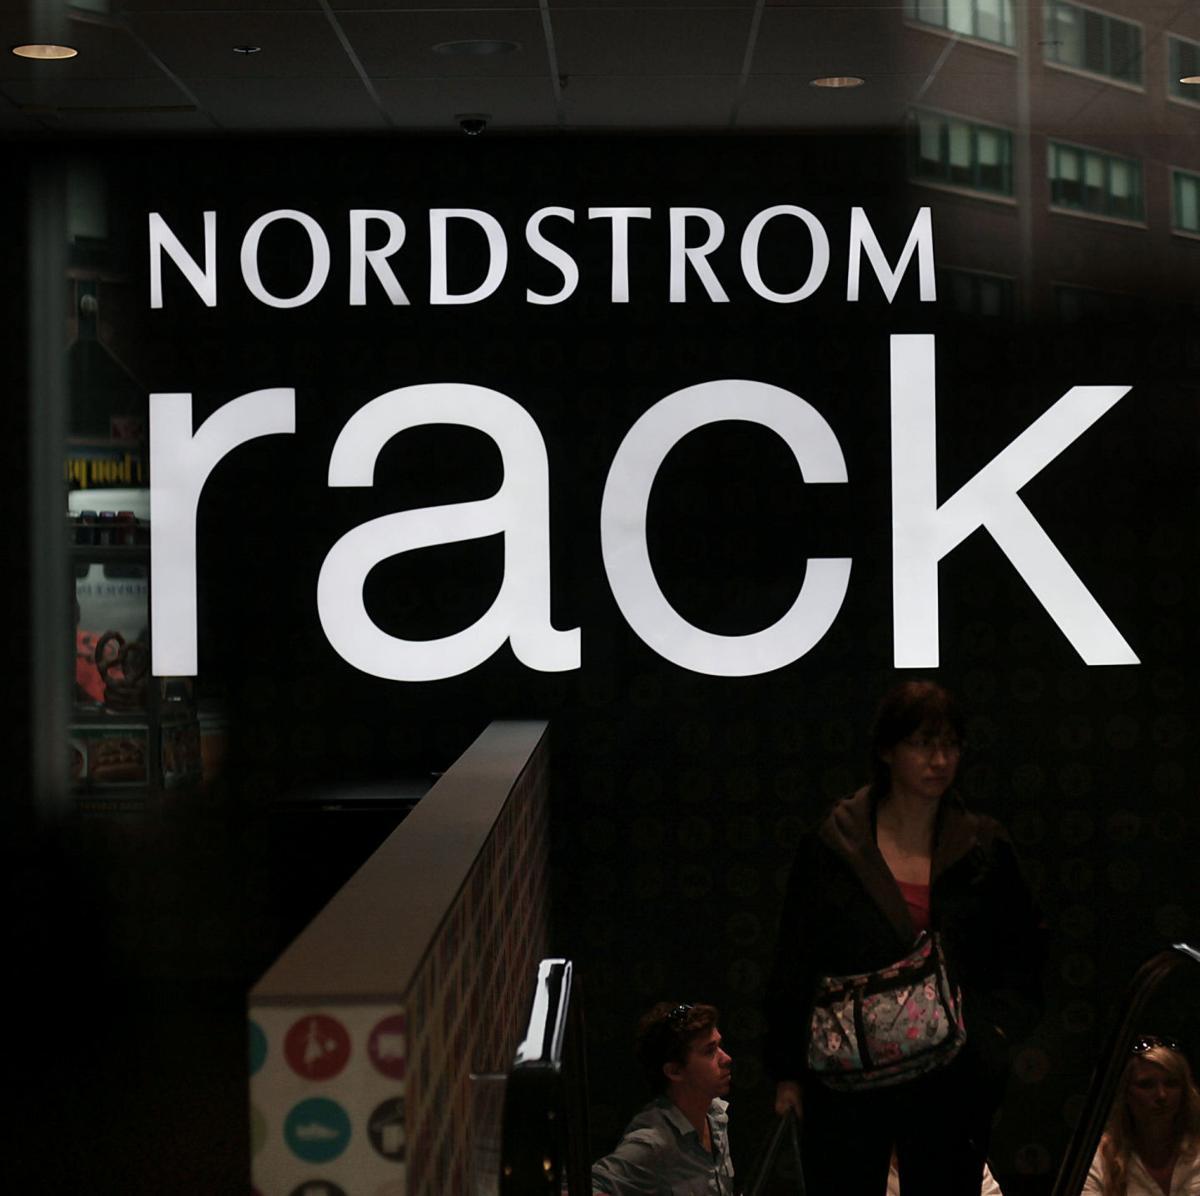 Nordstrom Rack Logo - Is Nordstrom Rack coming to Henrico? | Business | richmond.com